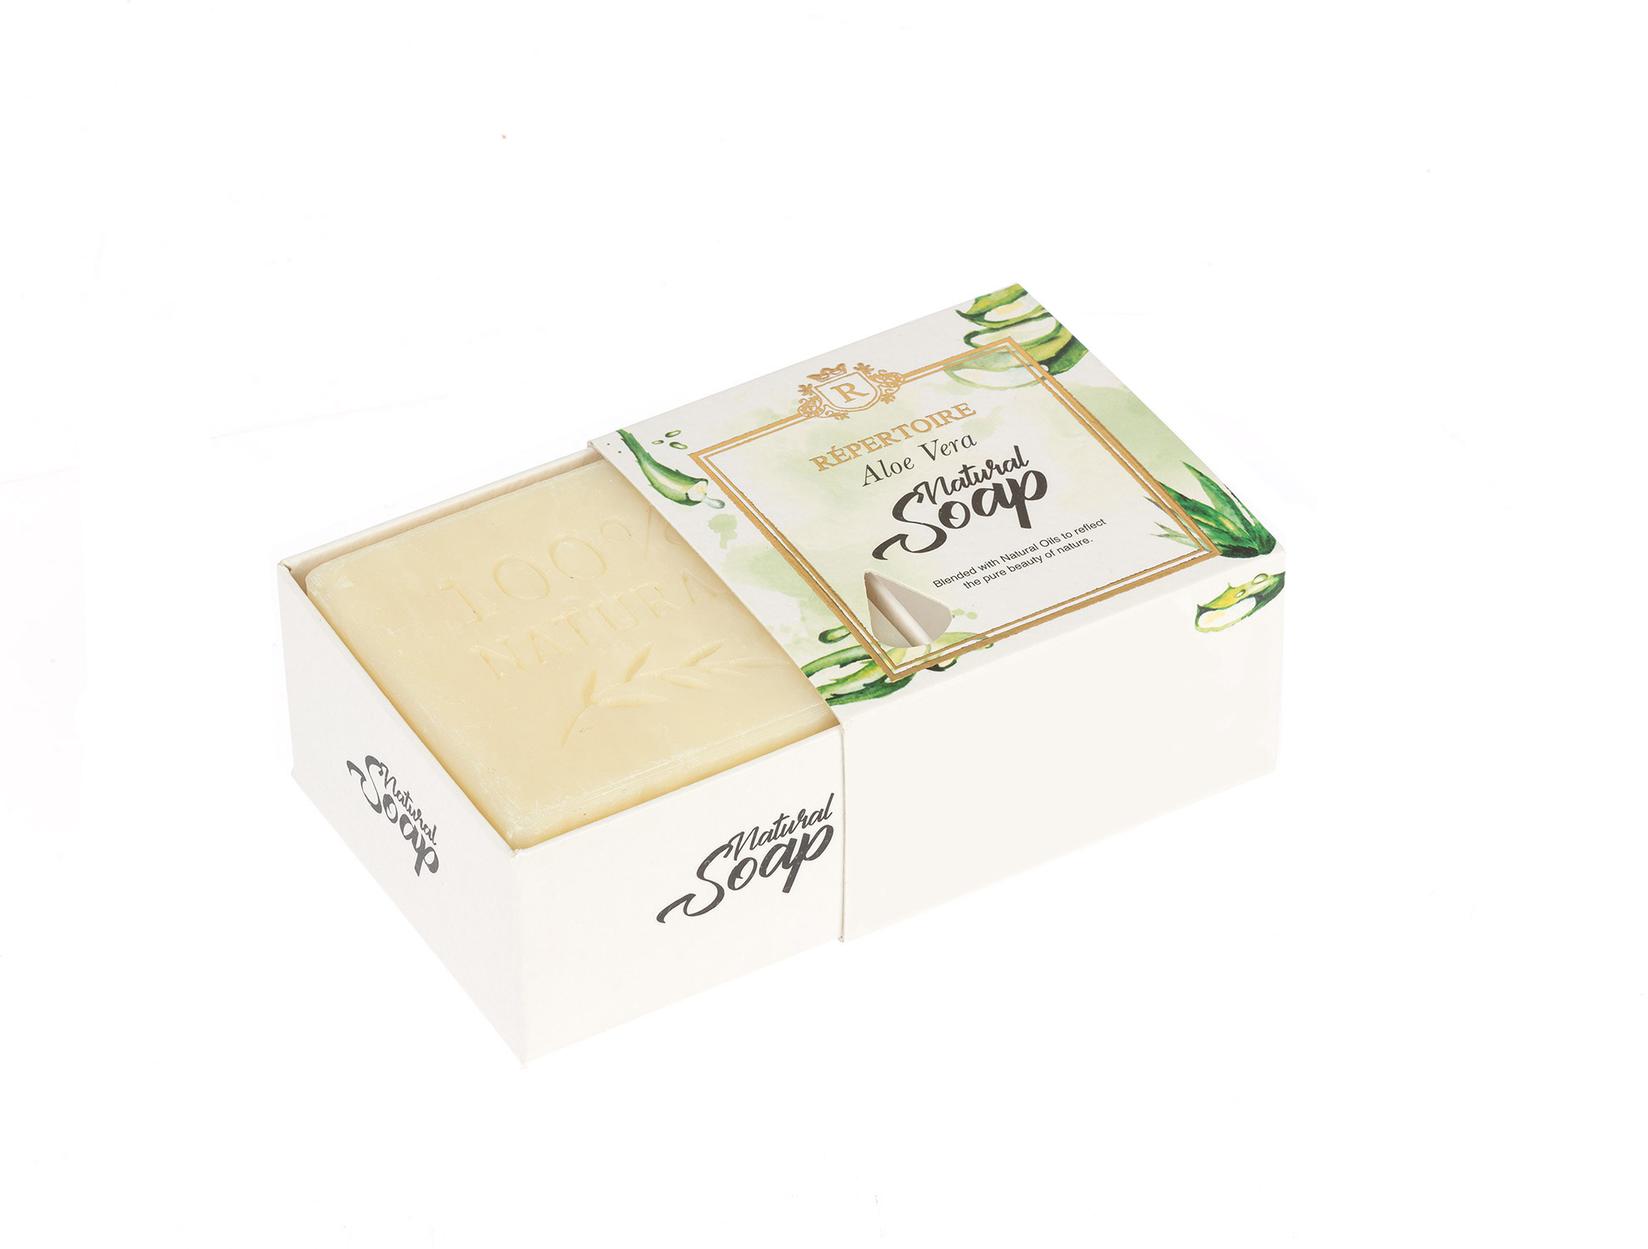 Selected image for MADAME COCO Répertoire Solid Sapun, 125g, Aloe Vera